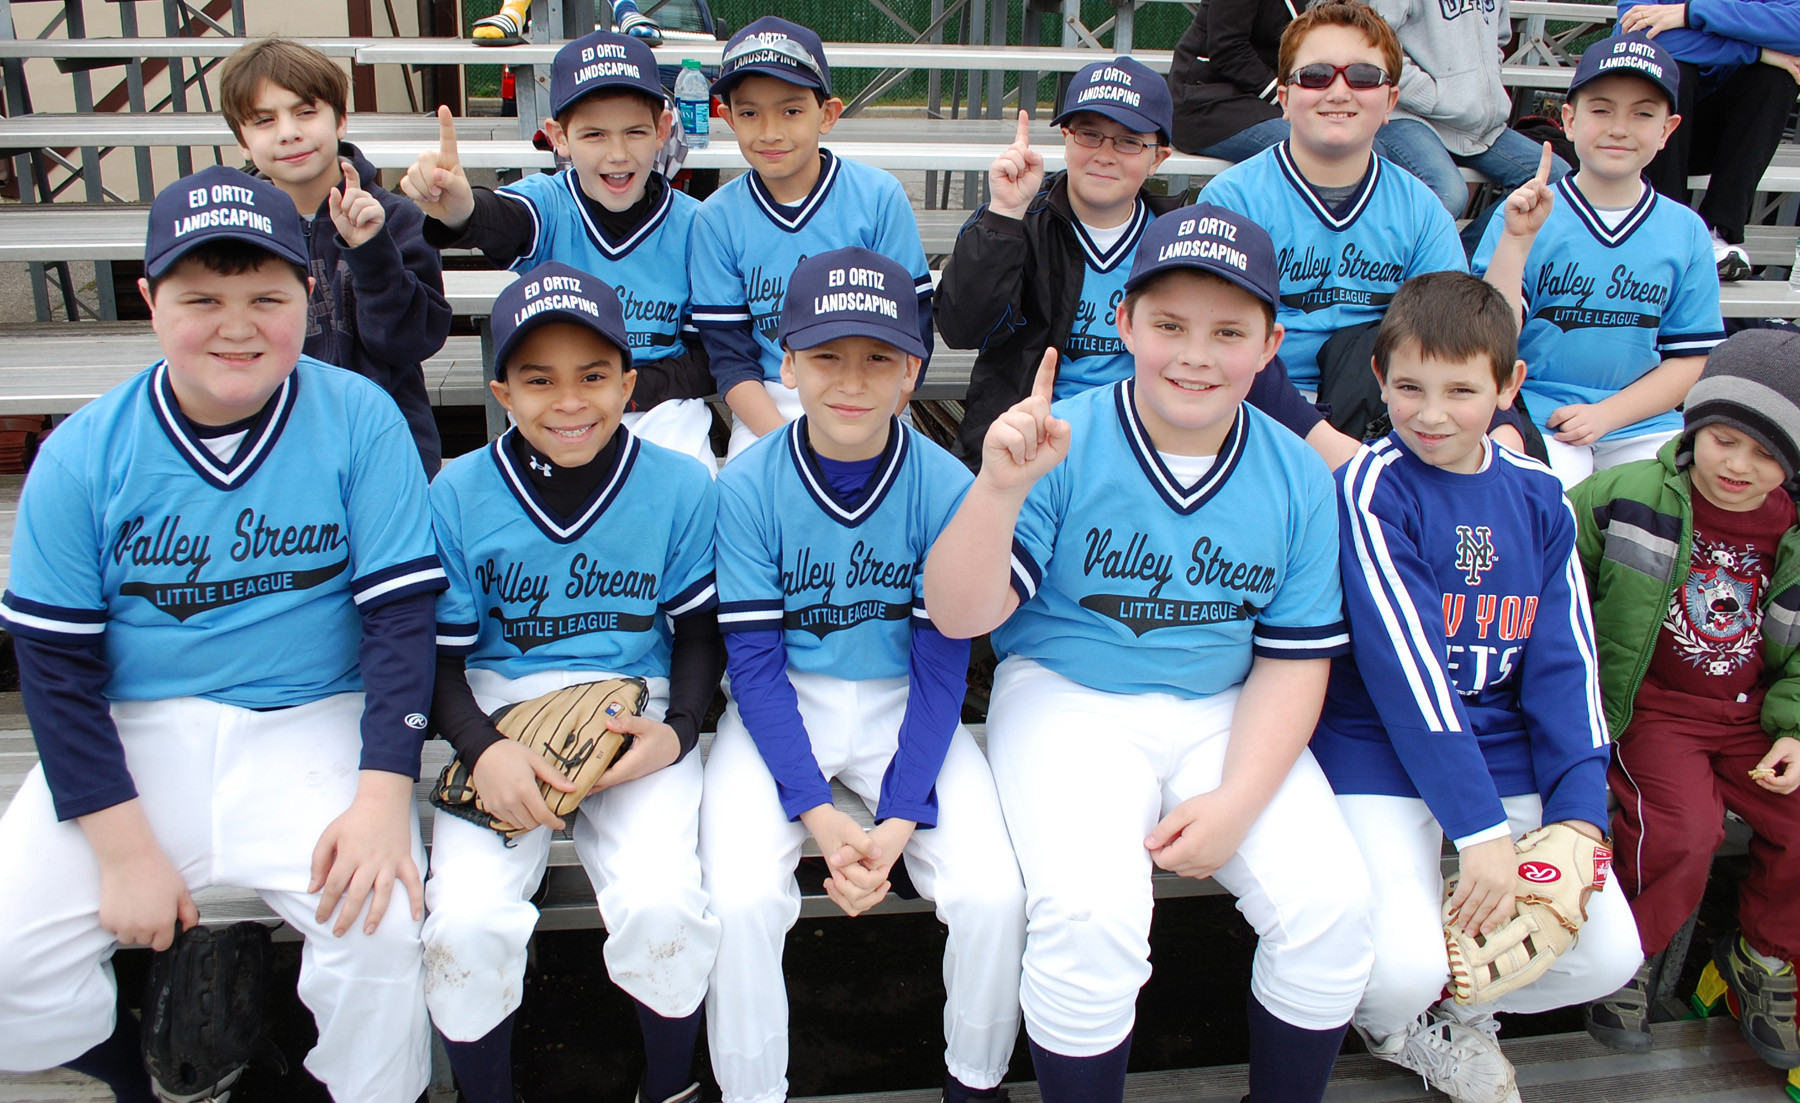 Players from the Valley Stream Little League gathered at Firemen’s Field last Saturday morning to open the 55th season.